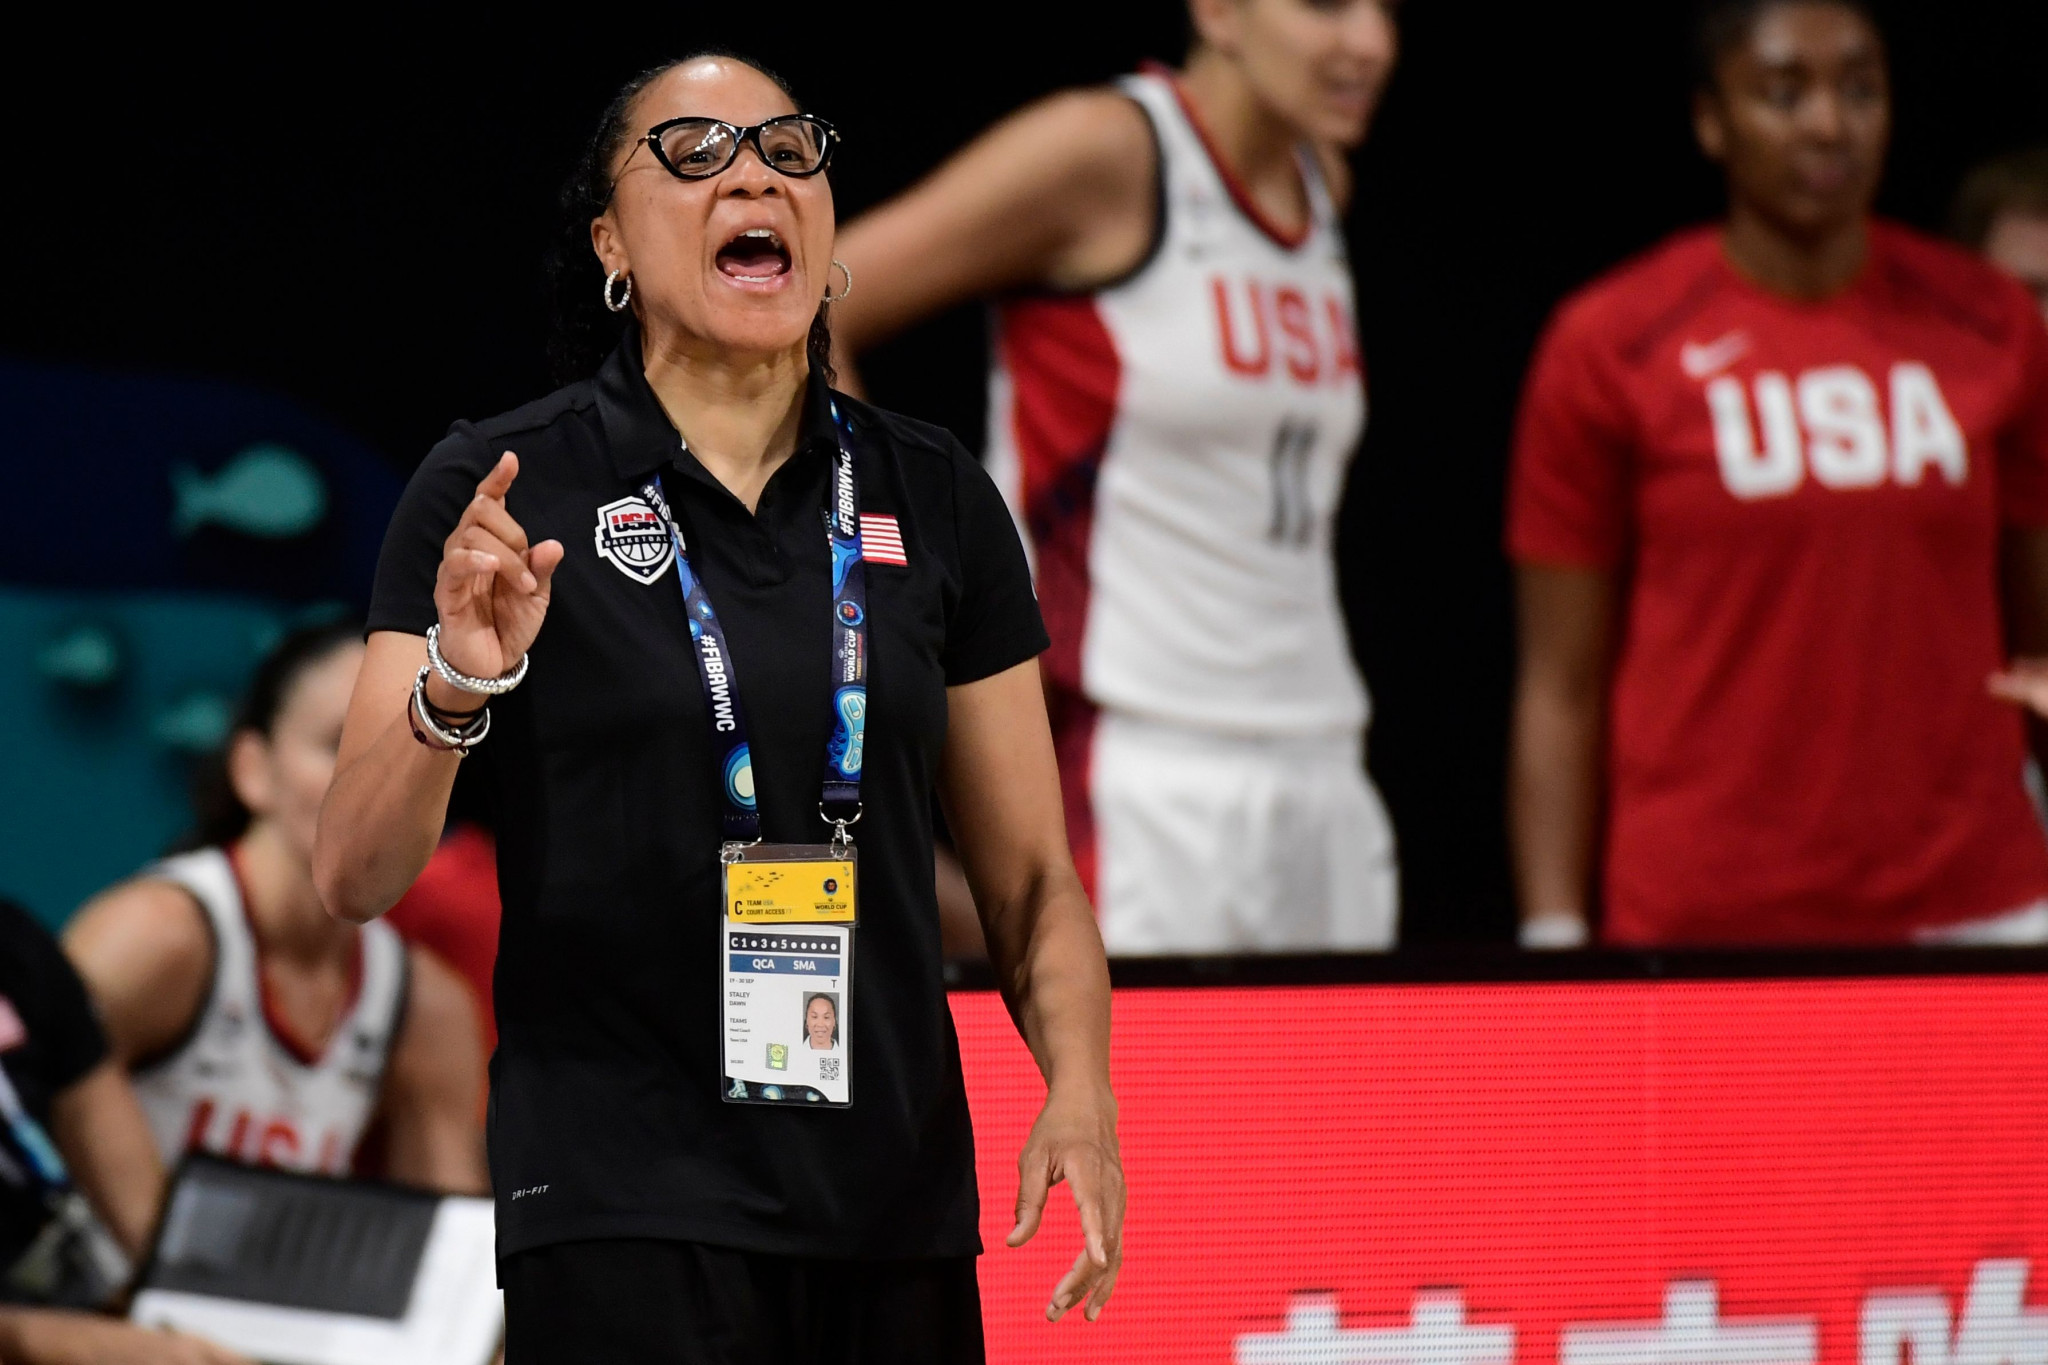 United States women's basketball team head coach Dawn Staley cast doubt over whether she would attend the postponed Tokyo 2020 Olympic Games ©Getty Images